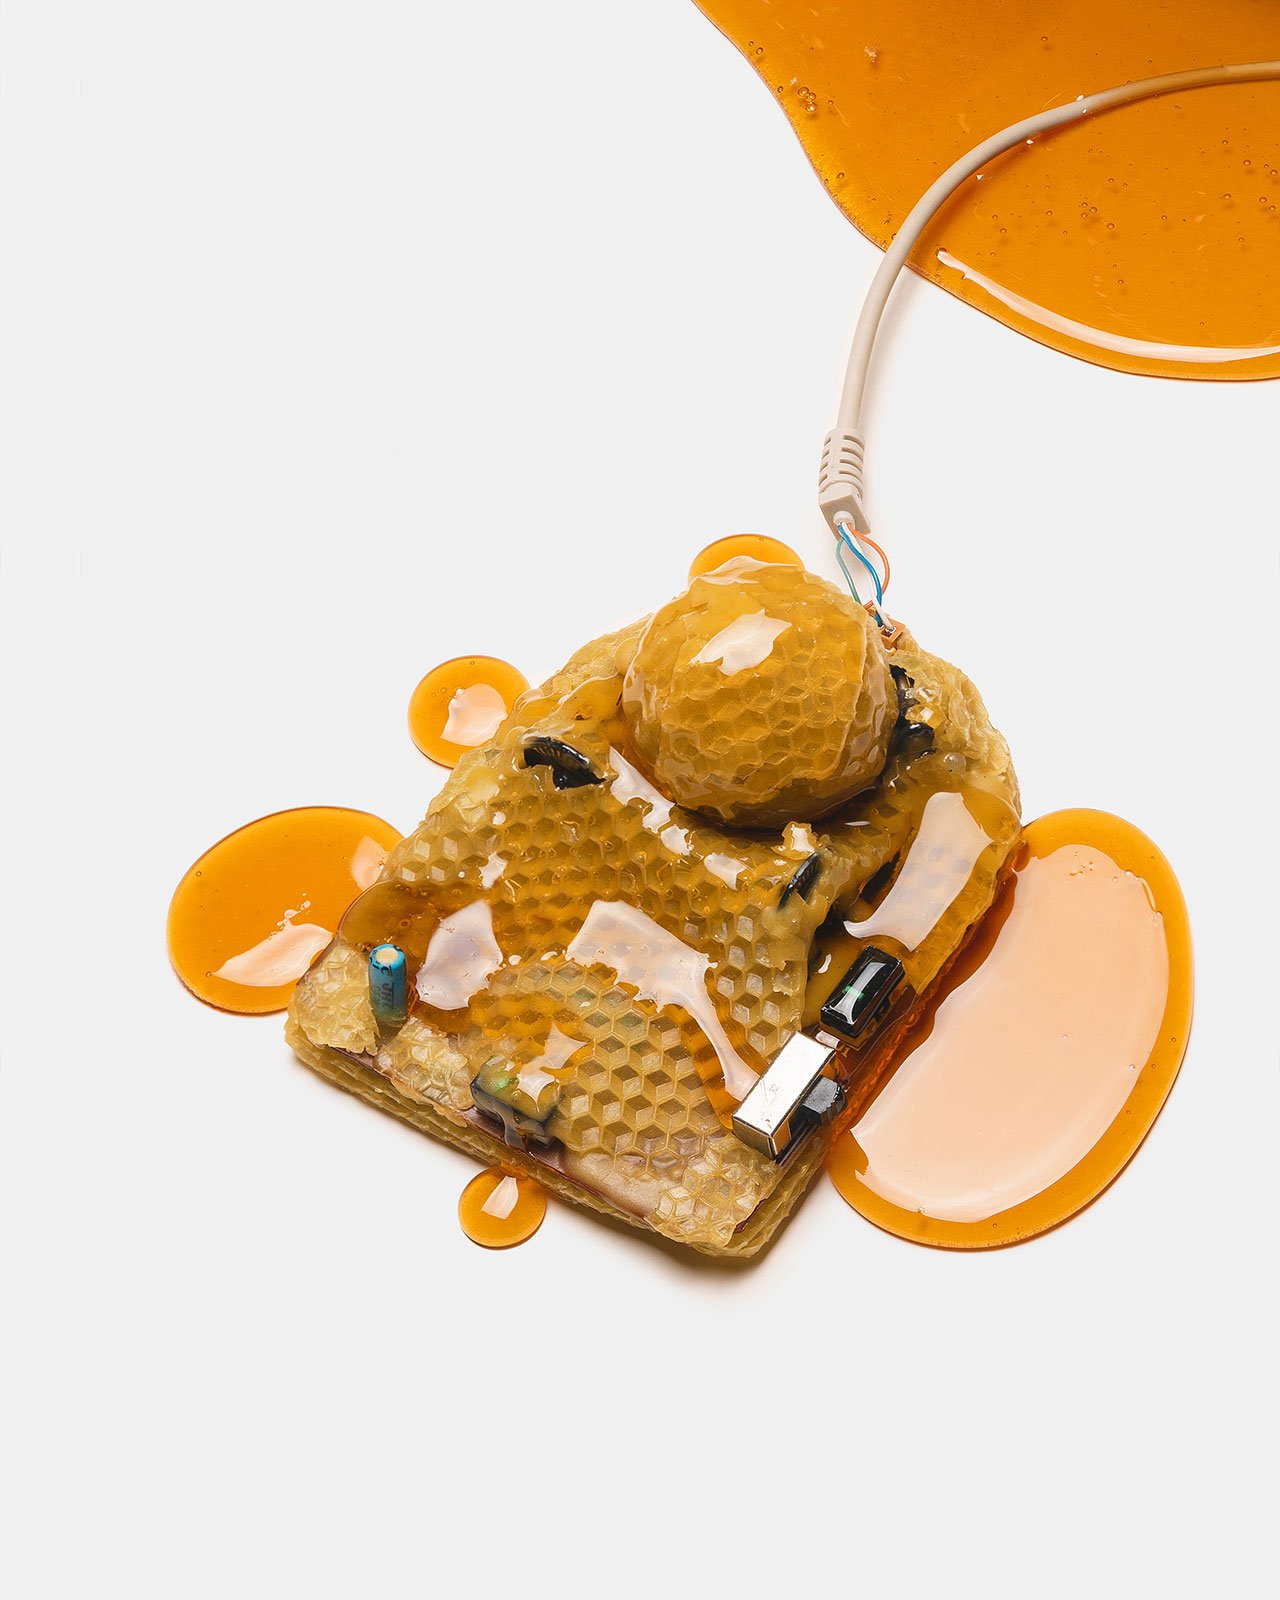 For the Rest of Us
A project by Hank Beyer and Alex Sizemore.
Honey.